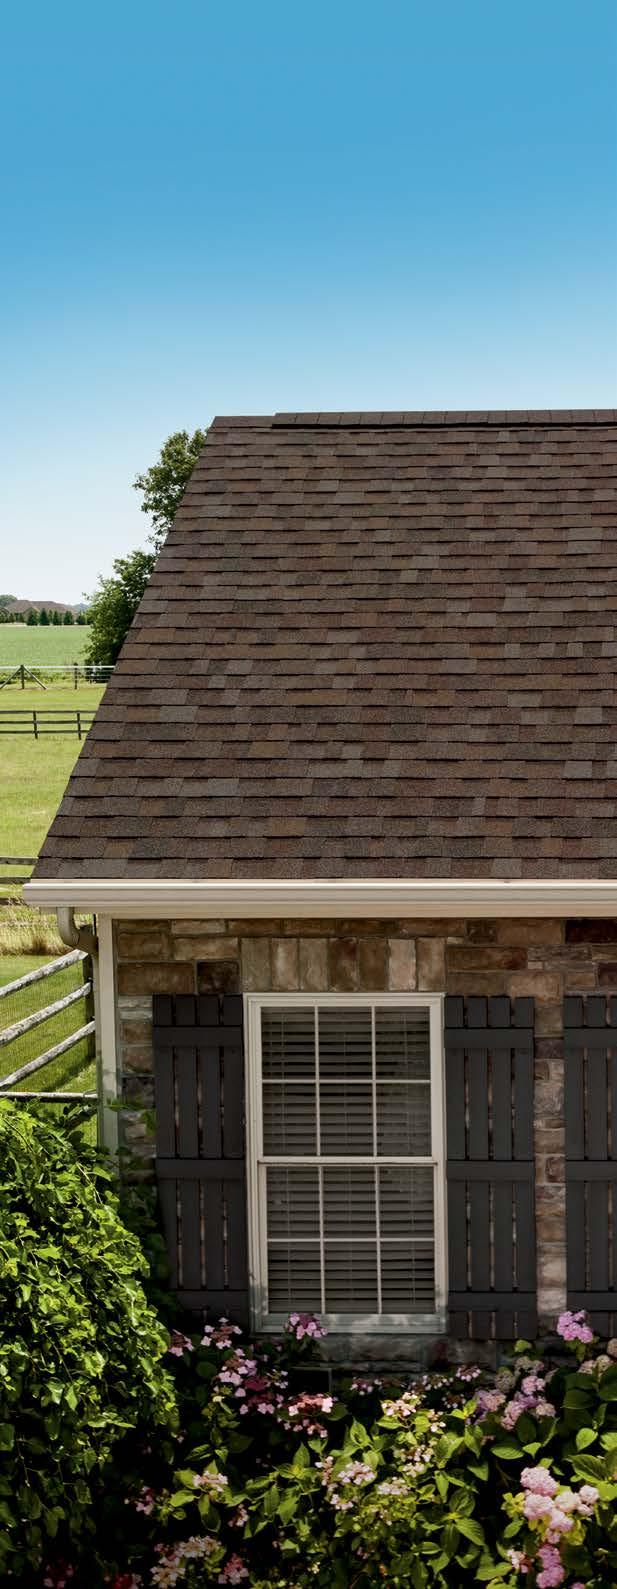 Home sweet home. Owens Corning Roofing wants to help make your purchase of a new roof a positive experience.